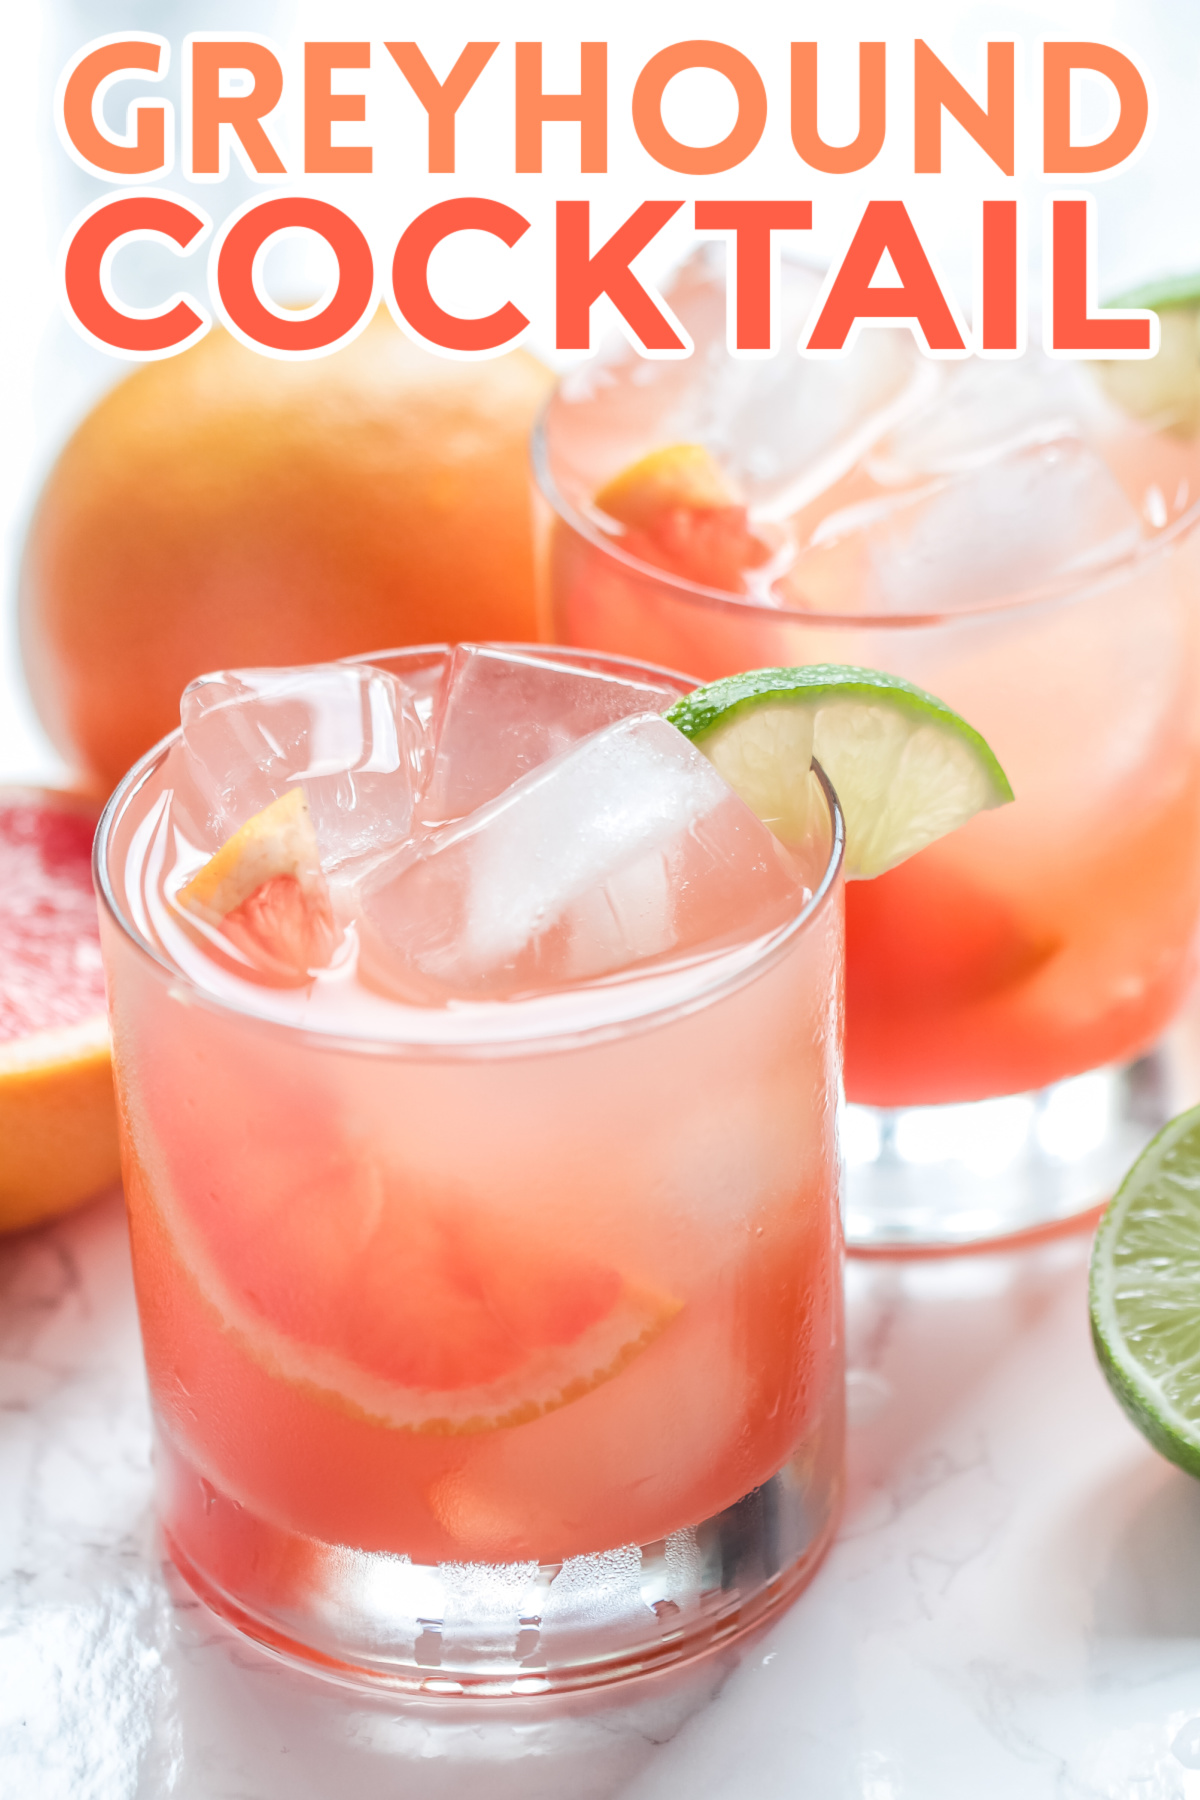 Looking for a refreshing and classic drink to enjoy any season or occasion? Check out this easy recipe for the Greyhound cocktail!